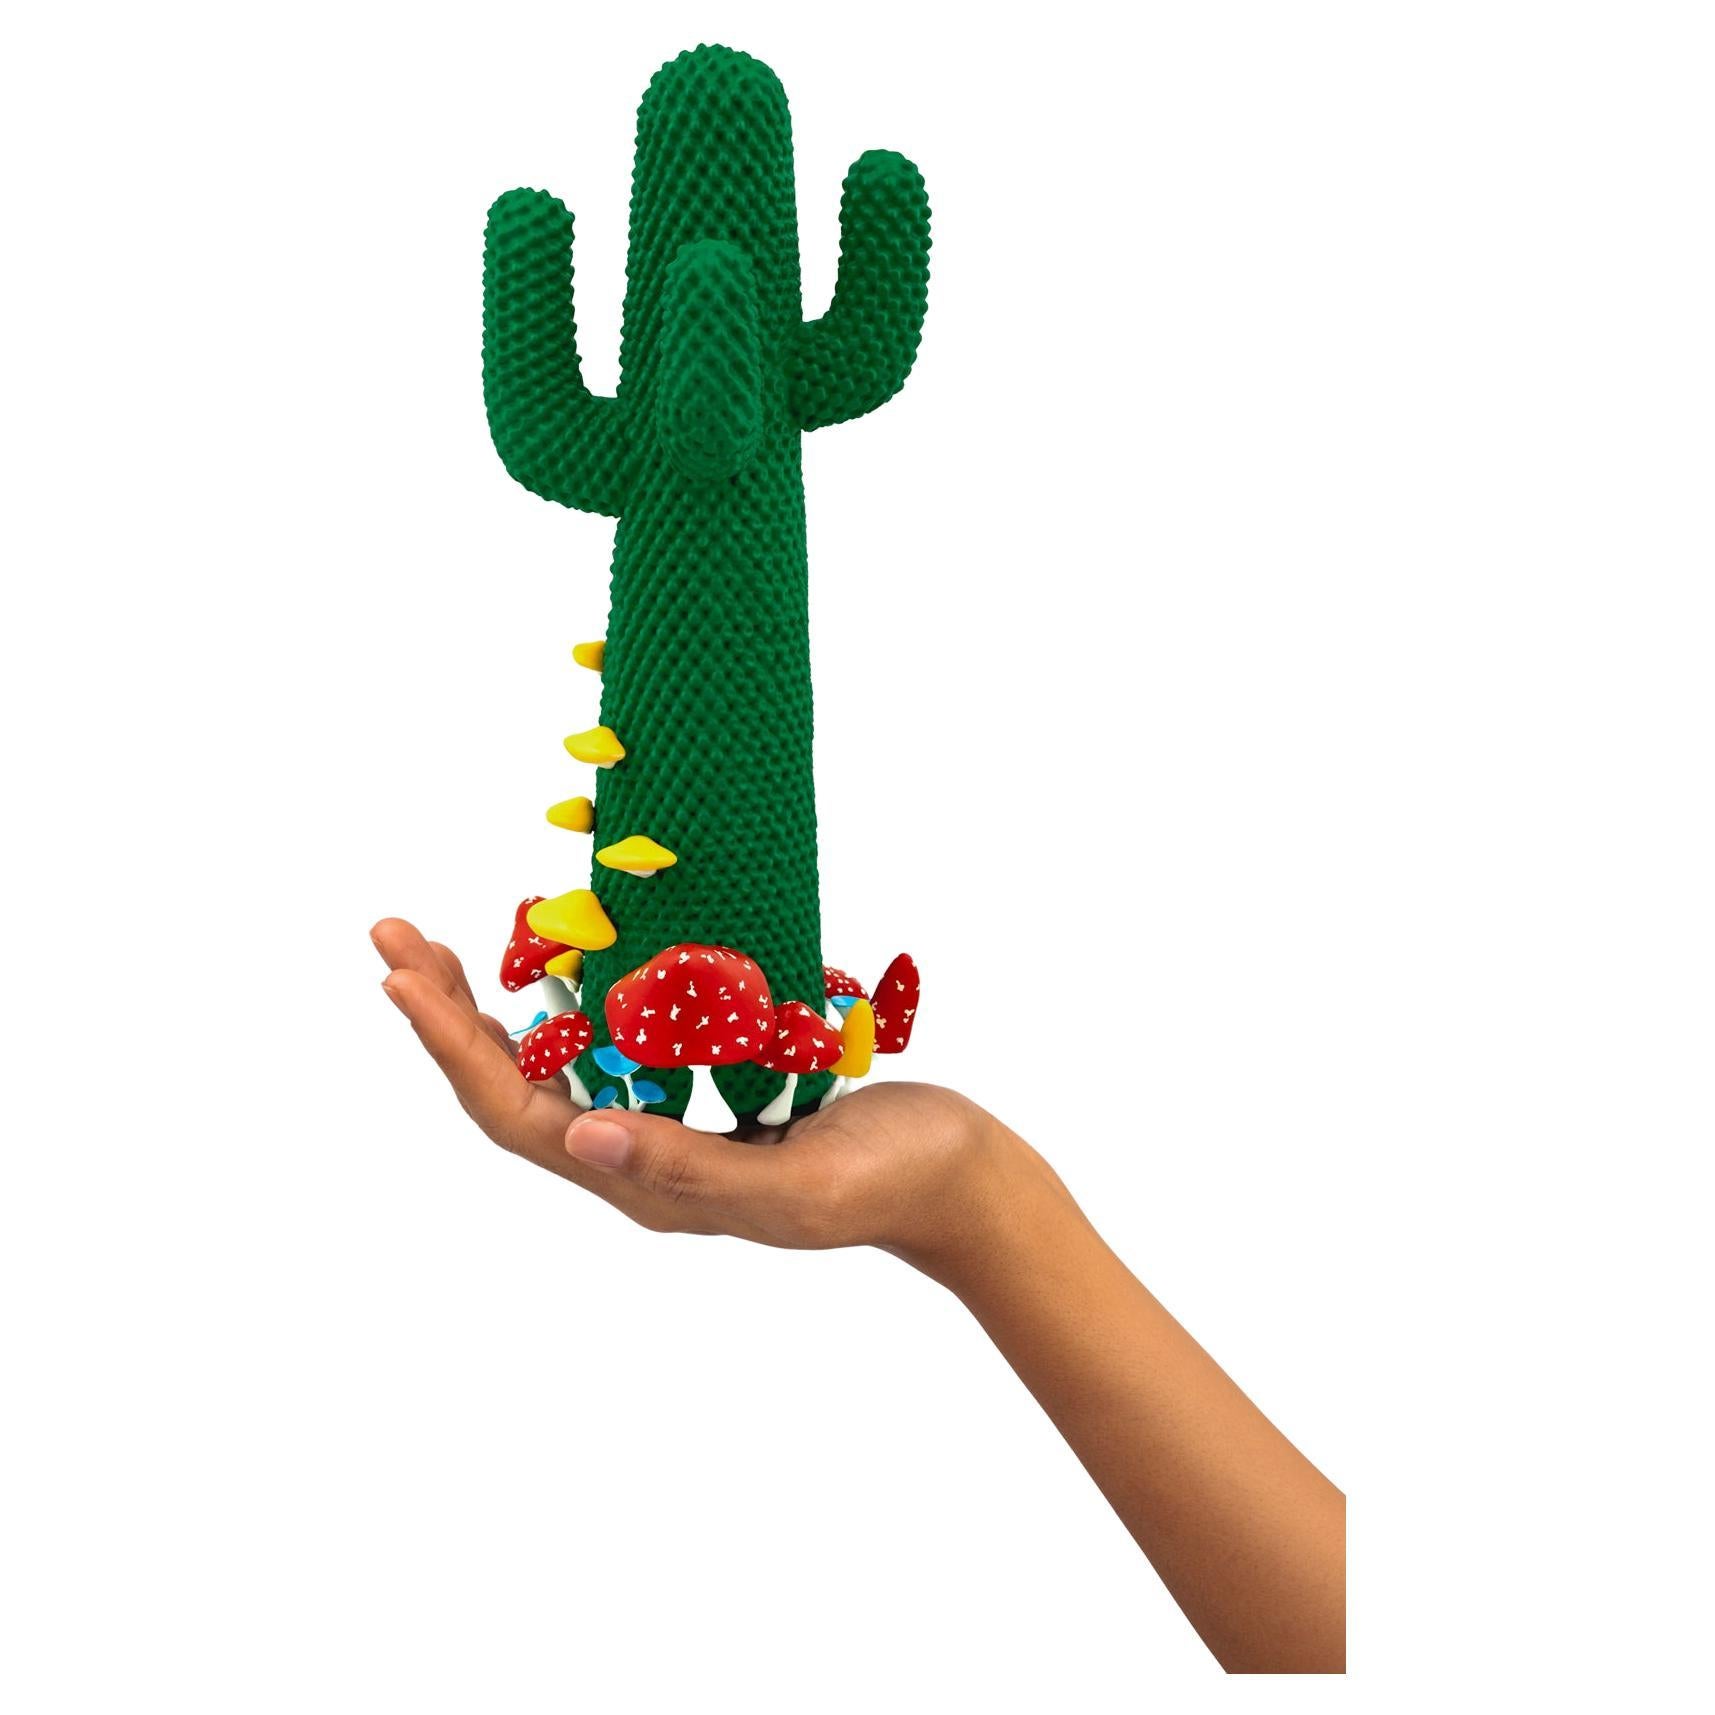 LIMITED EDITION #22/99

Gufram presents the miniaturised version of the Shroom CACTUS® created in collaboration with A$AP Rocky and the artist’s new design studio HOMMEMADE Exactly as the real-Size Shroom CACTUS®, the new Guframini piece features